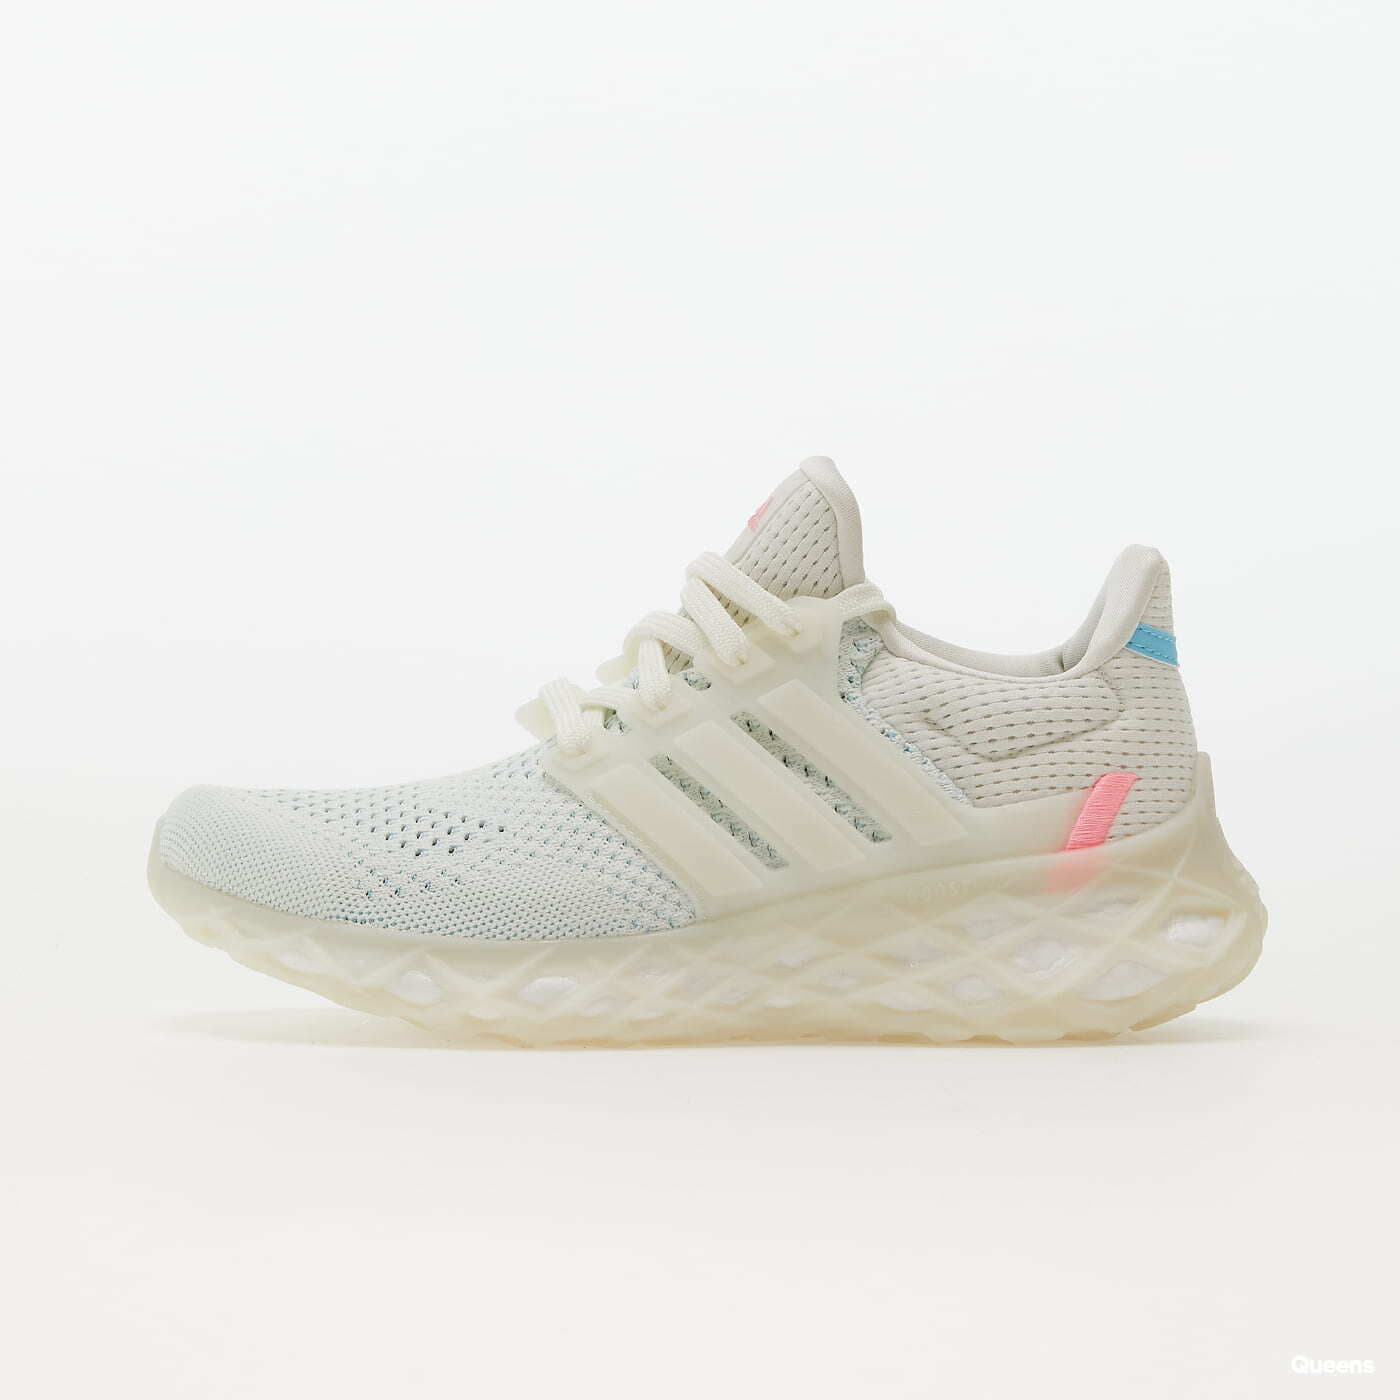 Women's shoes adidas Performance UltraBOOST Web Dna Off White/ Off White/ Blitz Blue